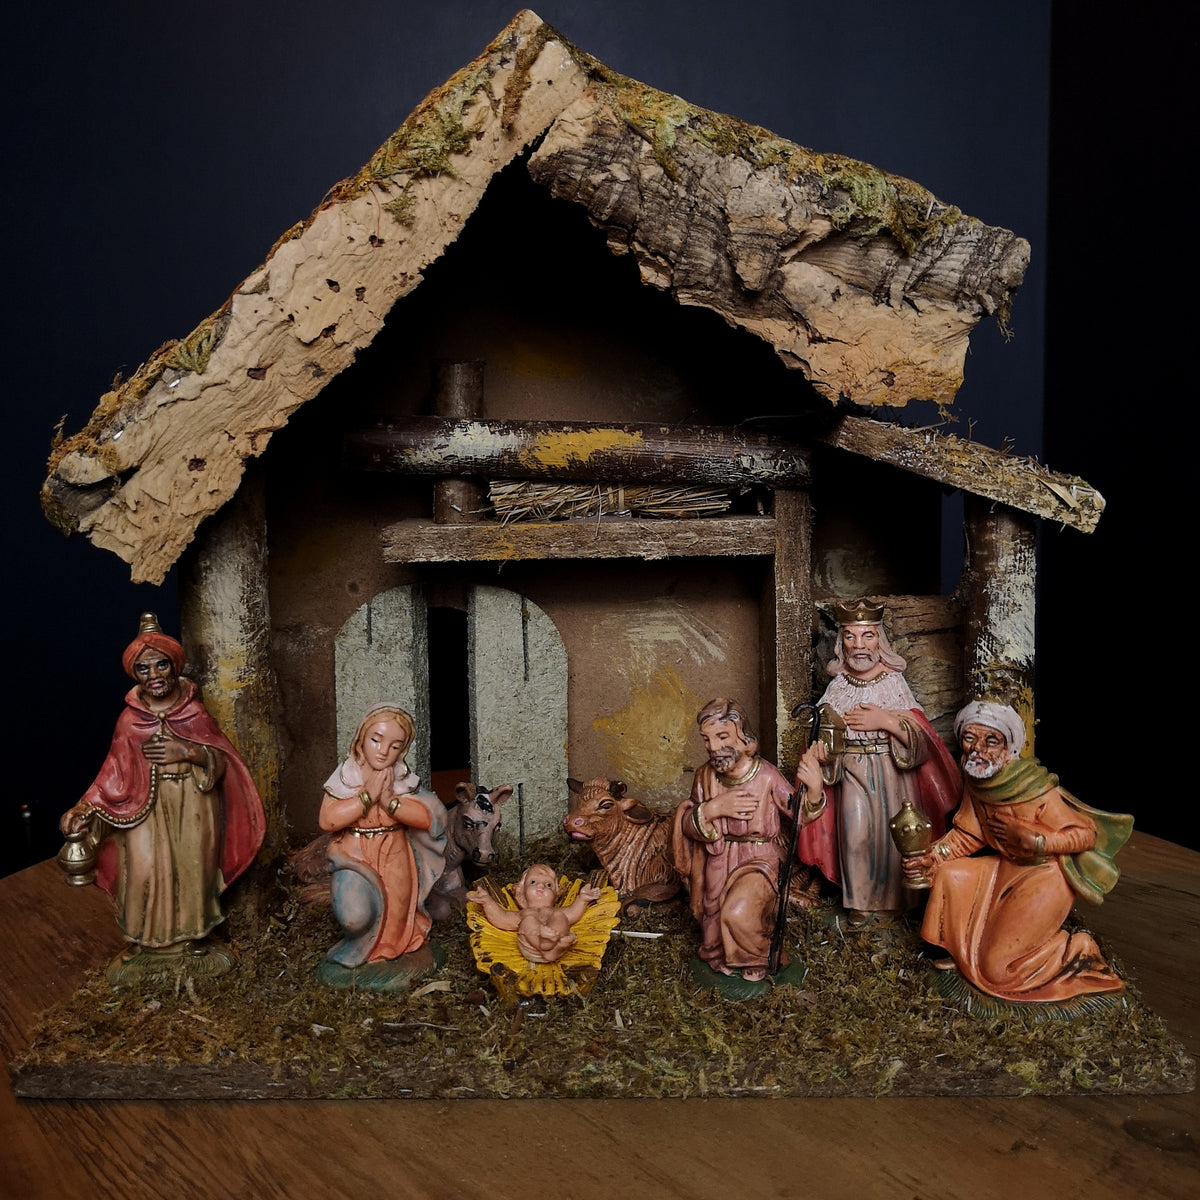 27cm Indoor Christmas Nativity Scene in Stable with Baby Jesus and 7 Figures Ornament